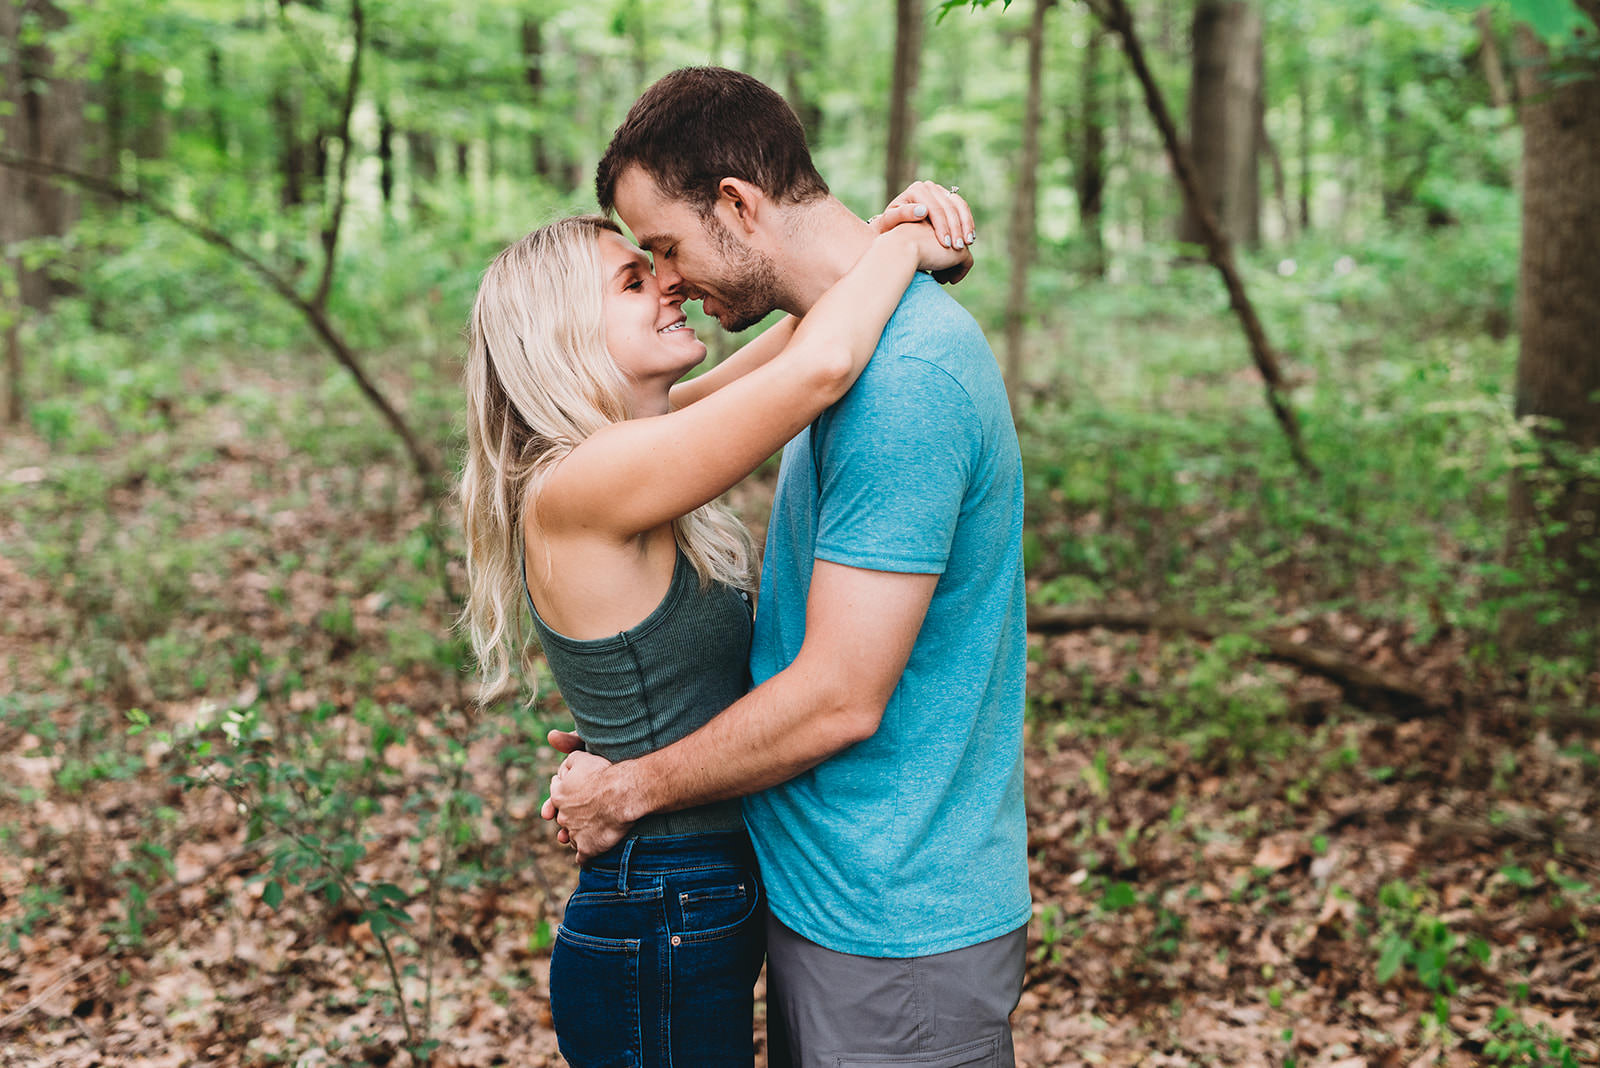 blonde woman in a green tank top and denim jeans kisses a man in shorts with a blue shirt in the woods